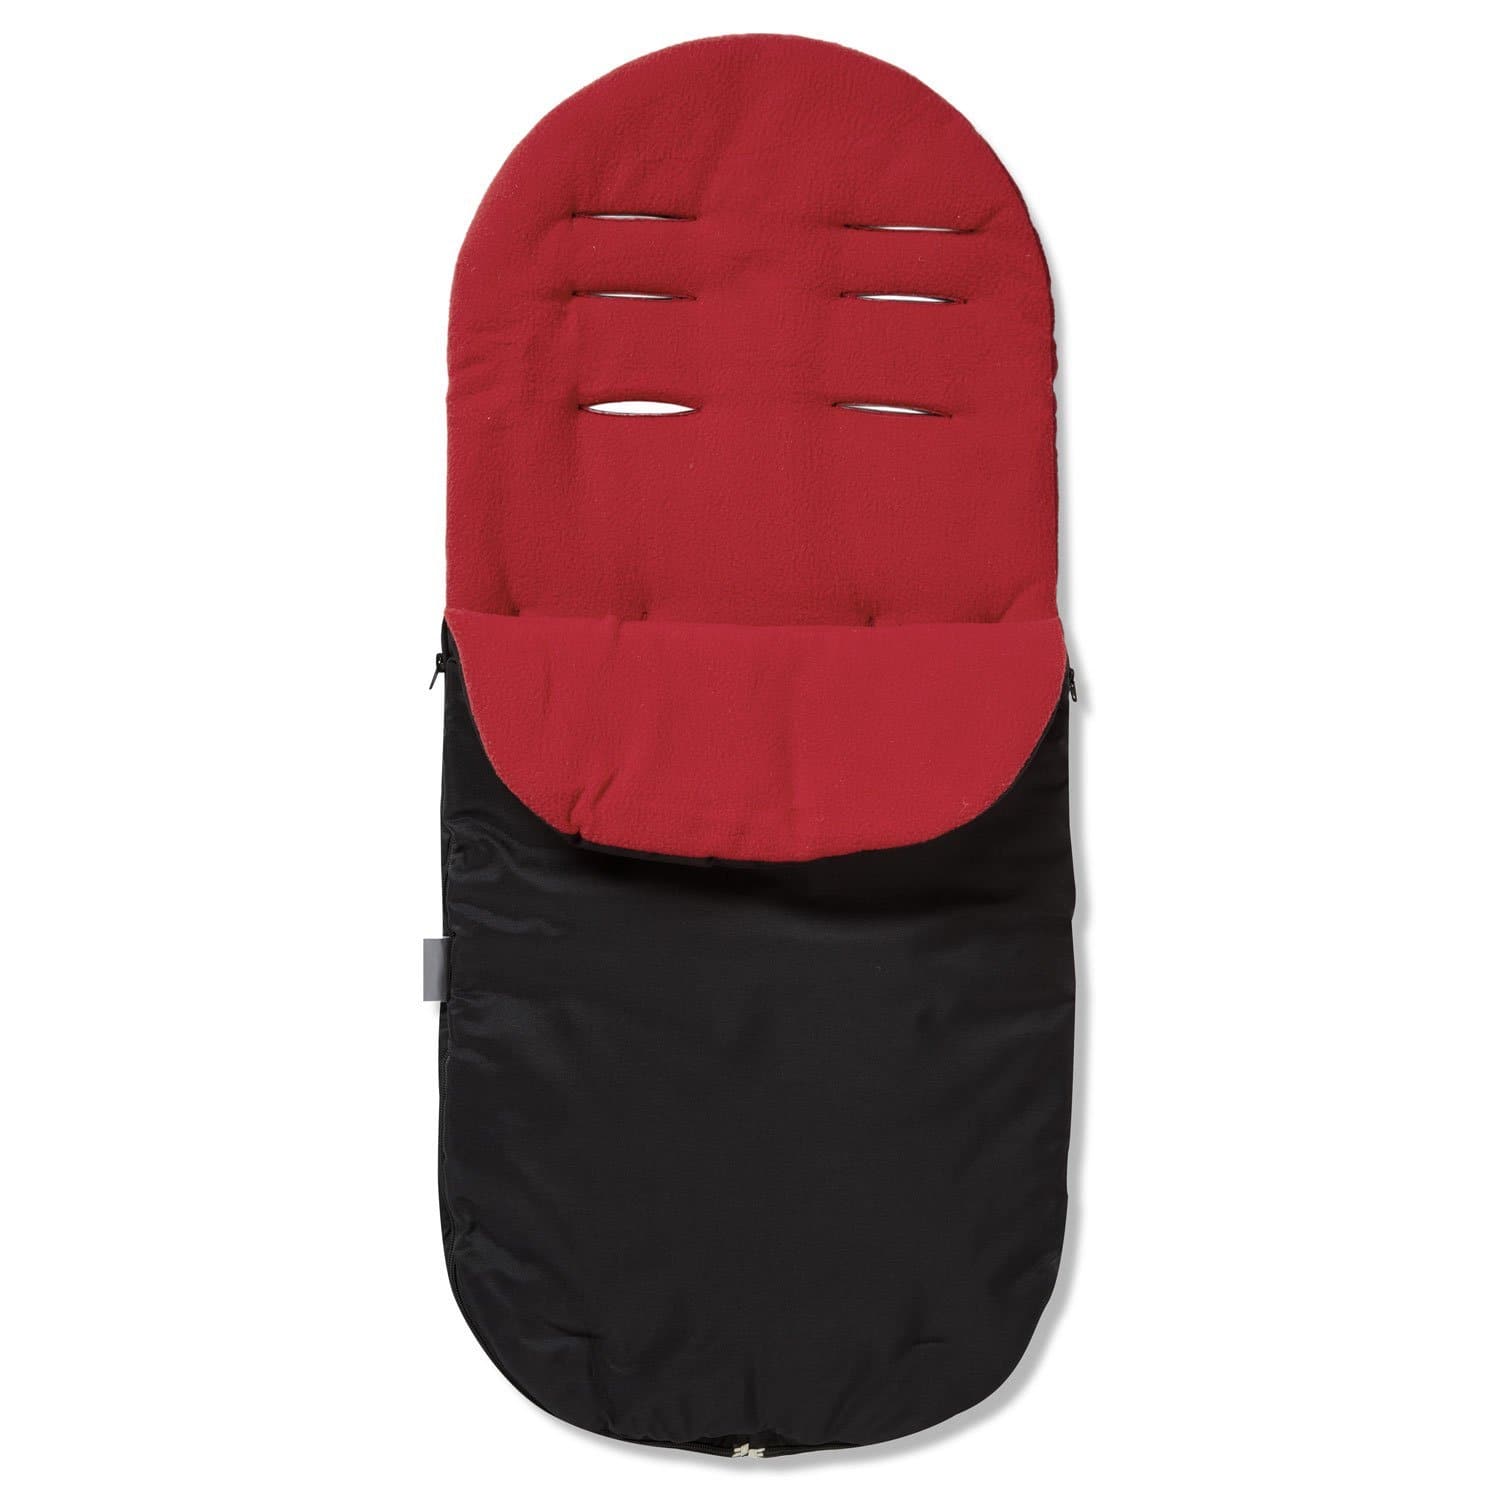 Footmuff / Cosy Toes Compatible with Egg - Red / Fits All Models | For Your Little One